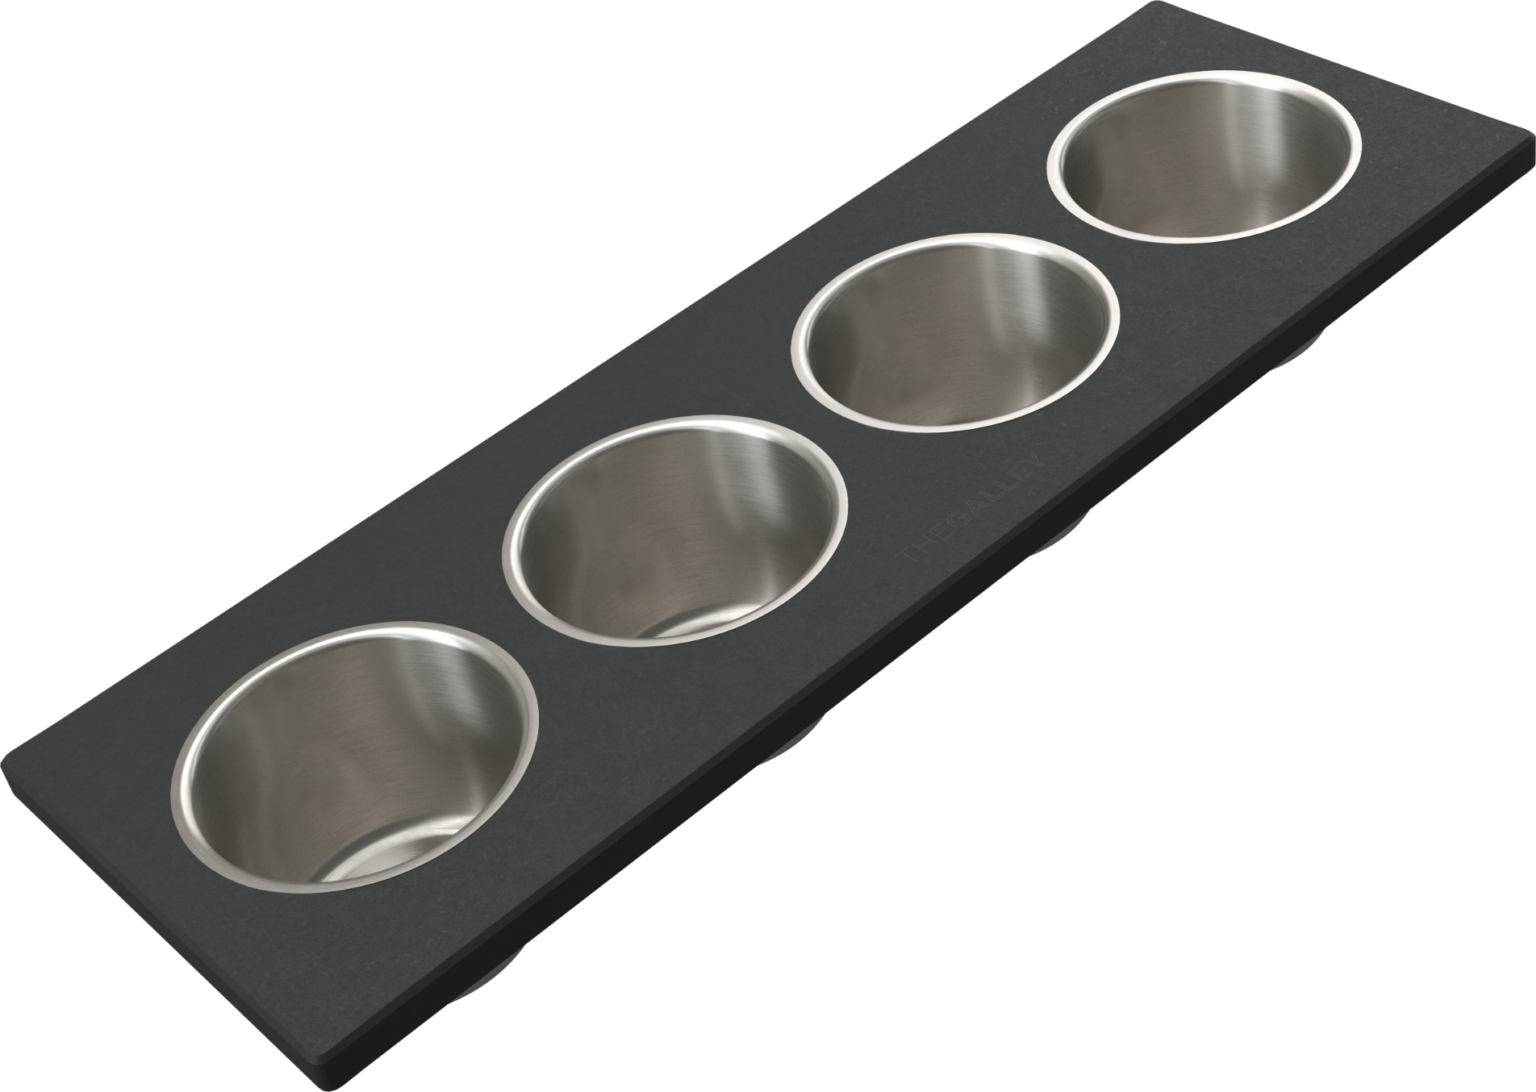 The Galley Upper Tier Garnish Board 6" x 18" with Four Stainless Steel Bowls 4"